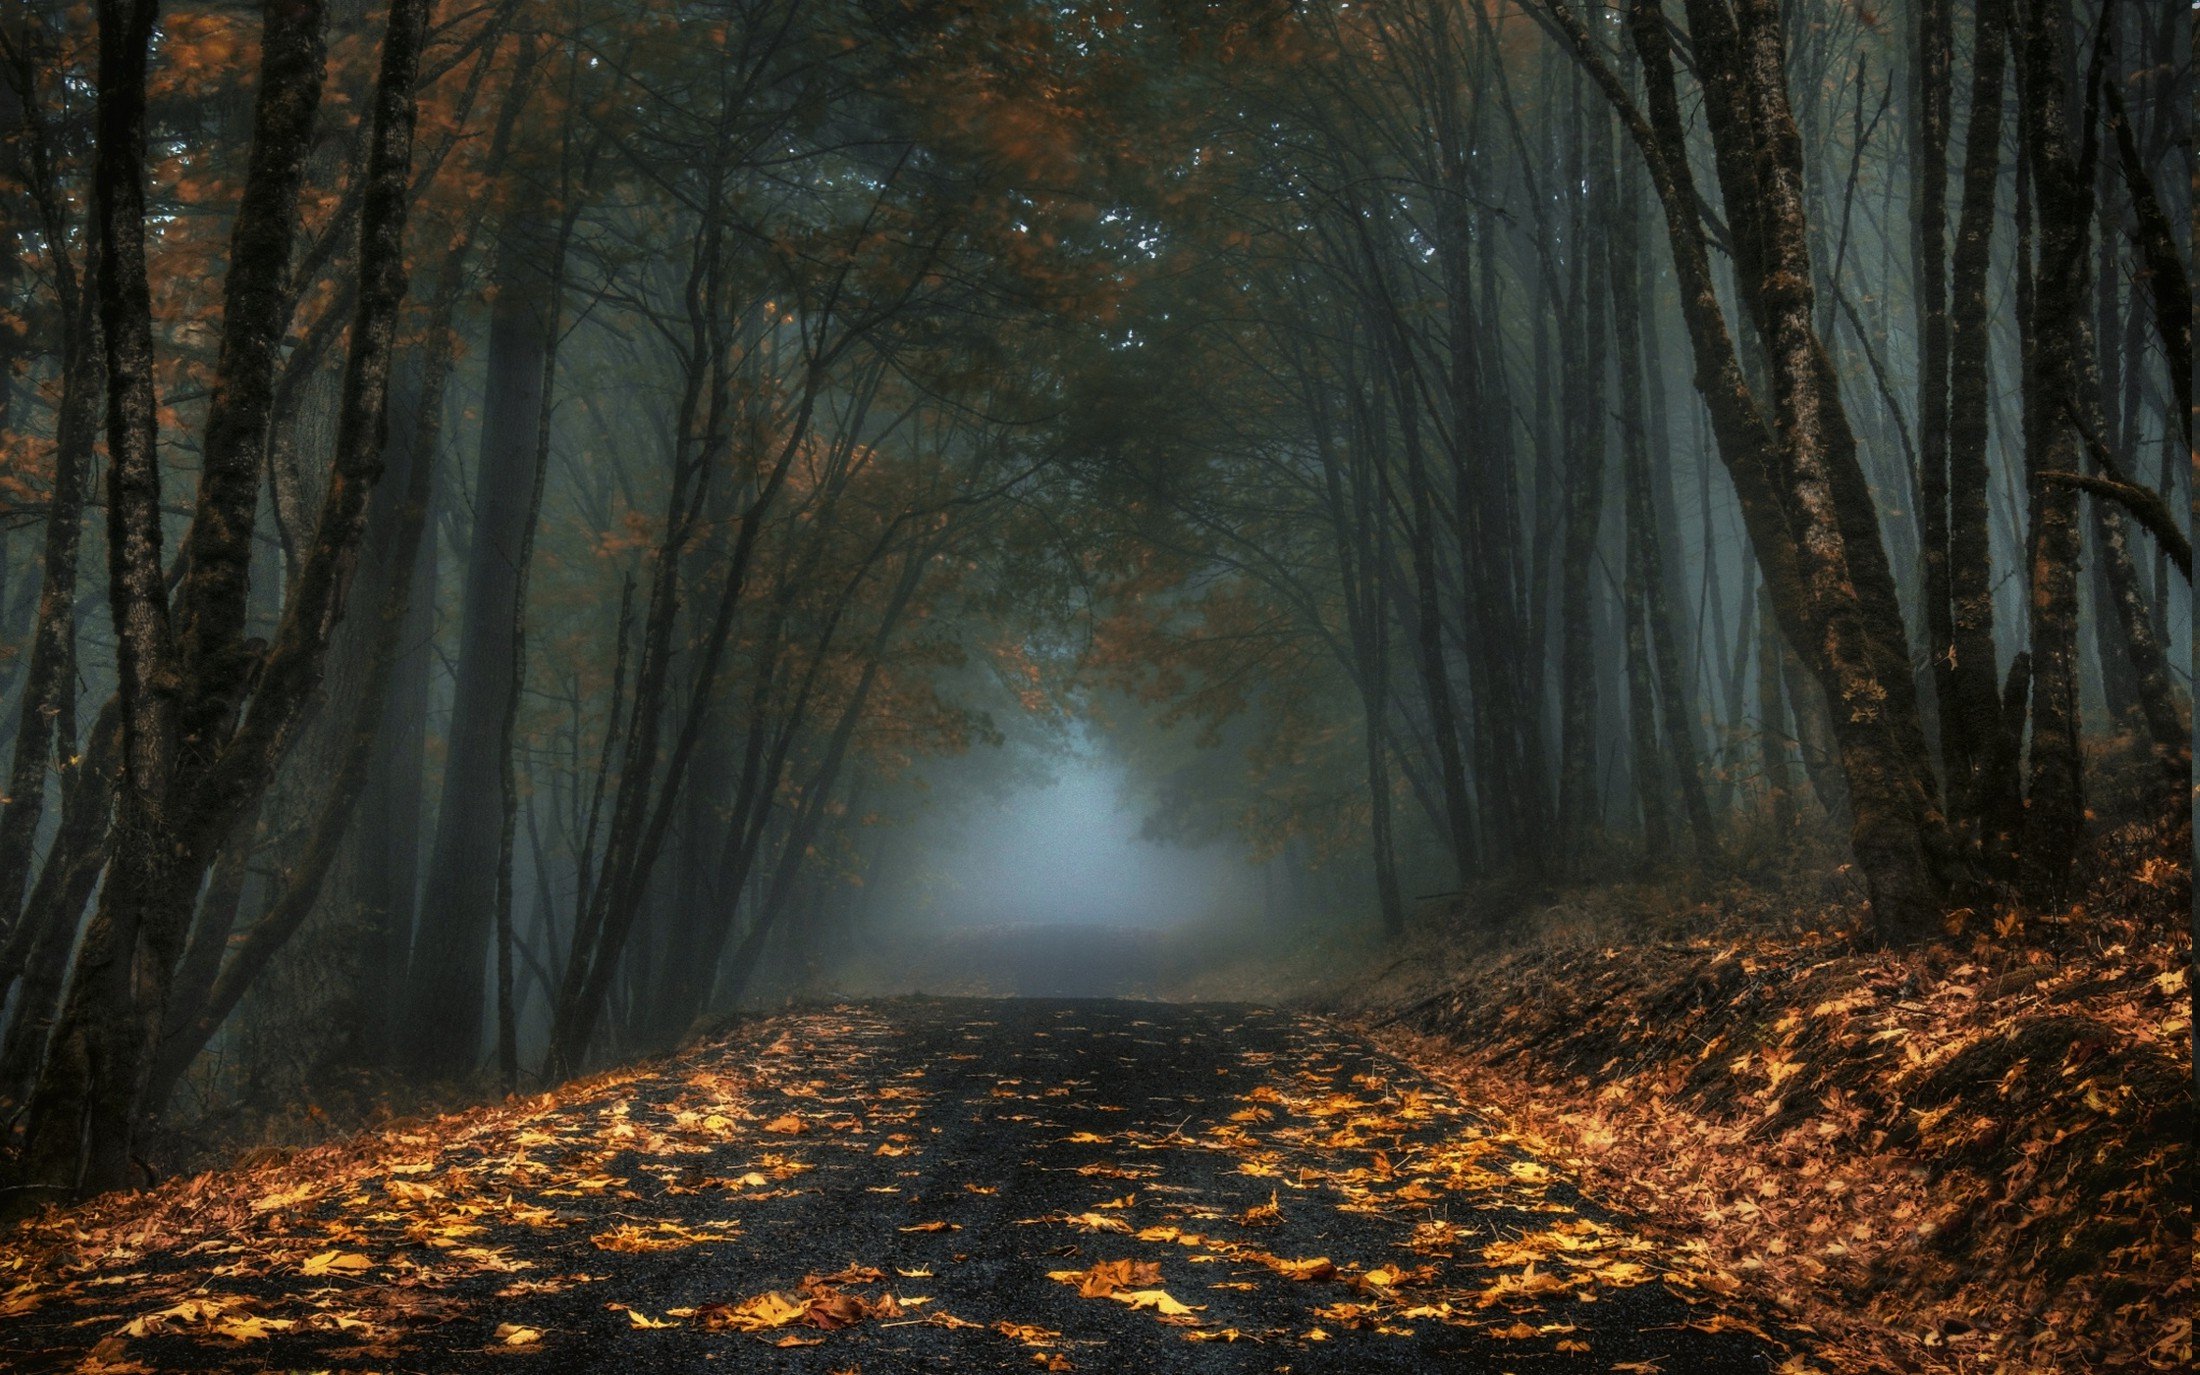 2200x1375 dark, fall, forest, landscape, leaves, mist, morning, nature, road, trees